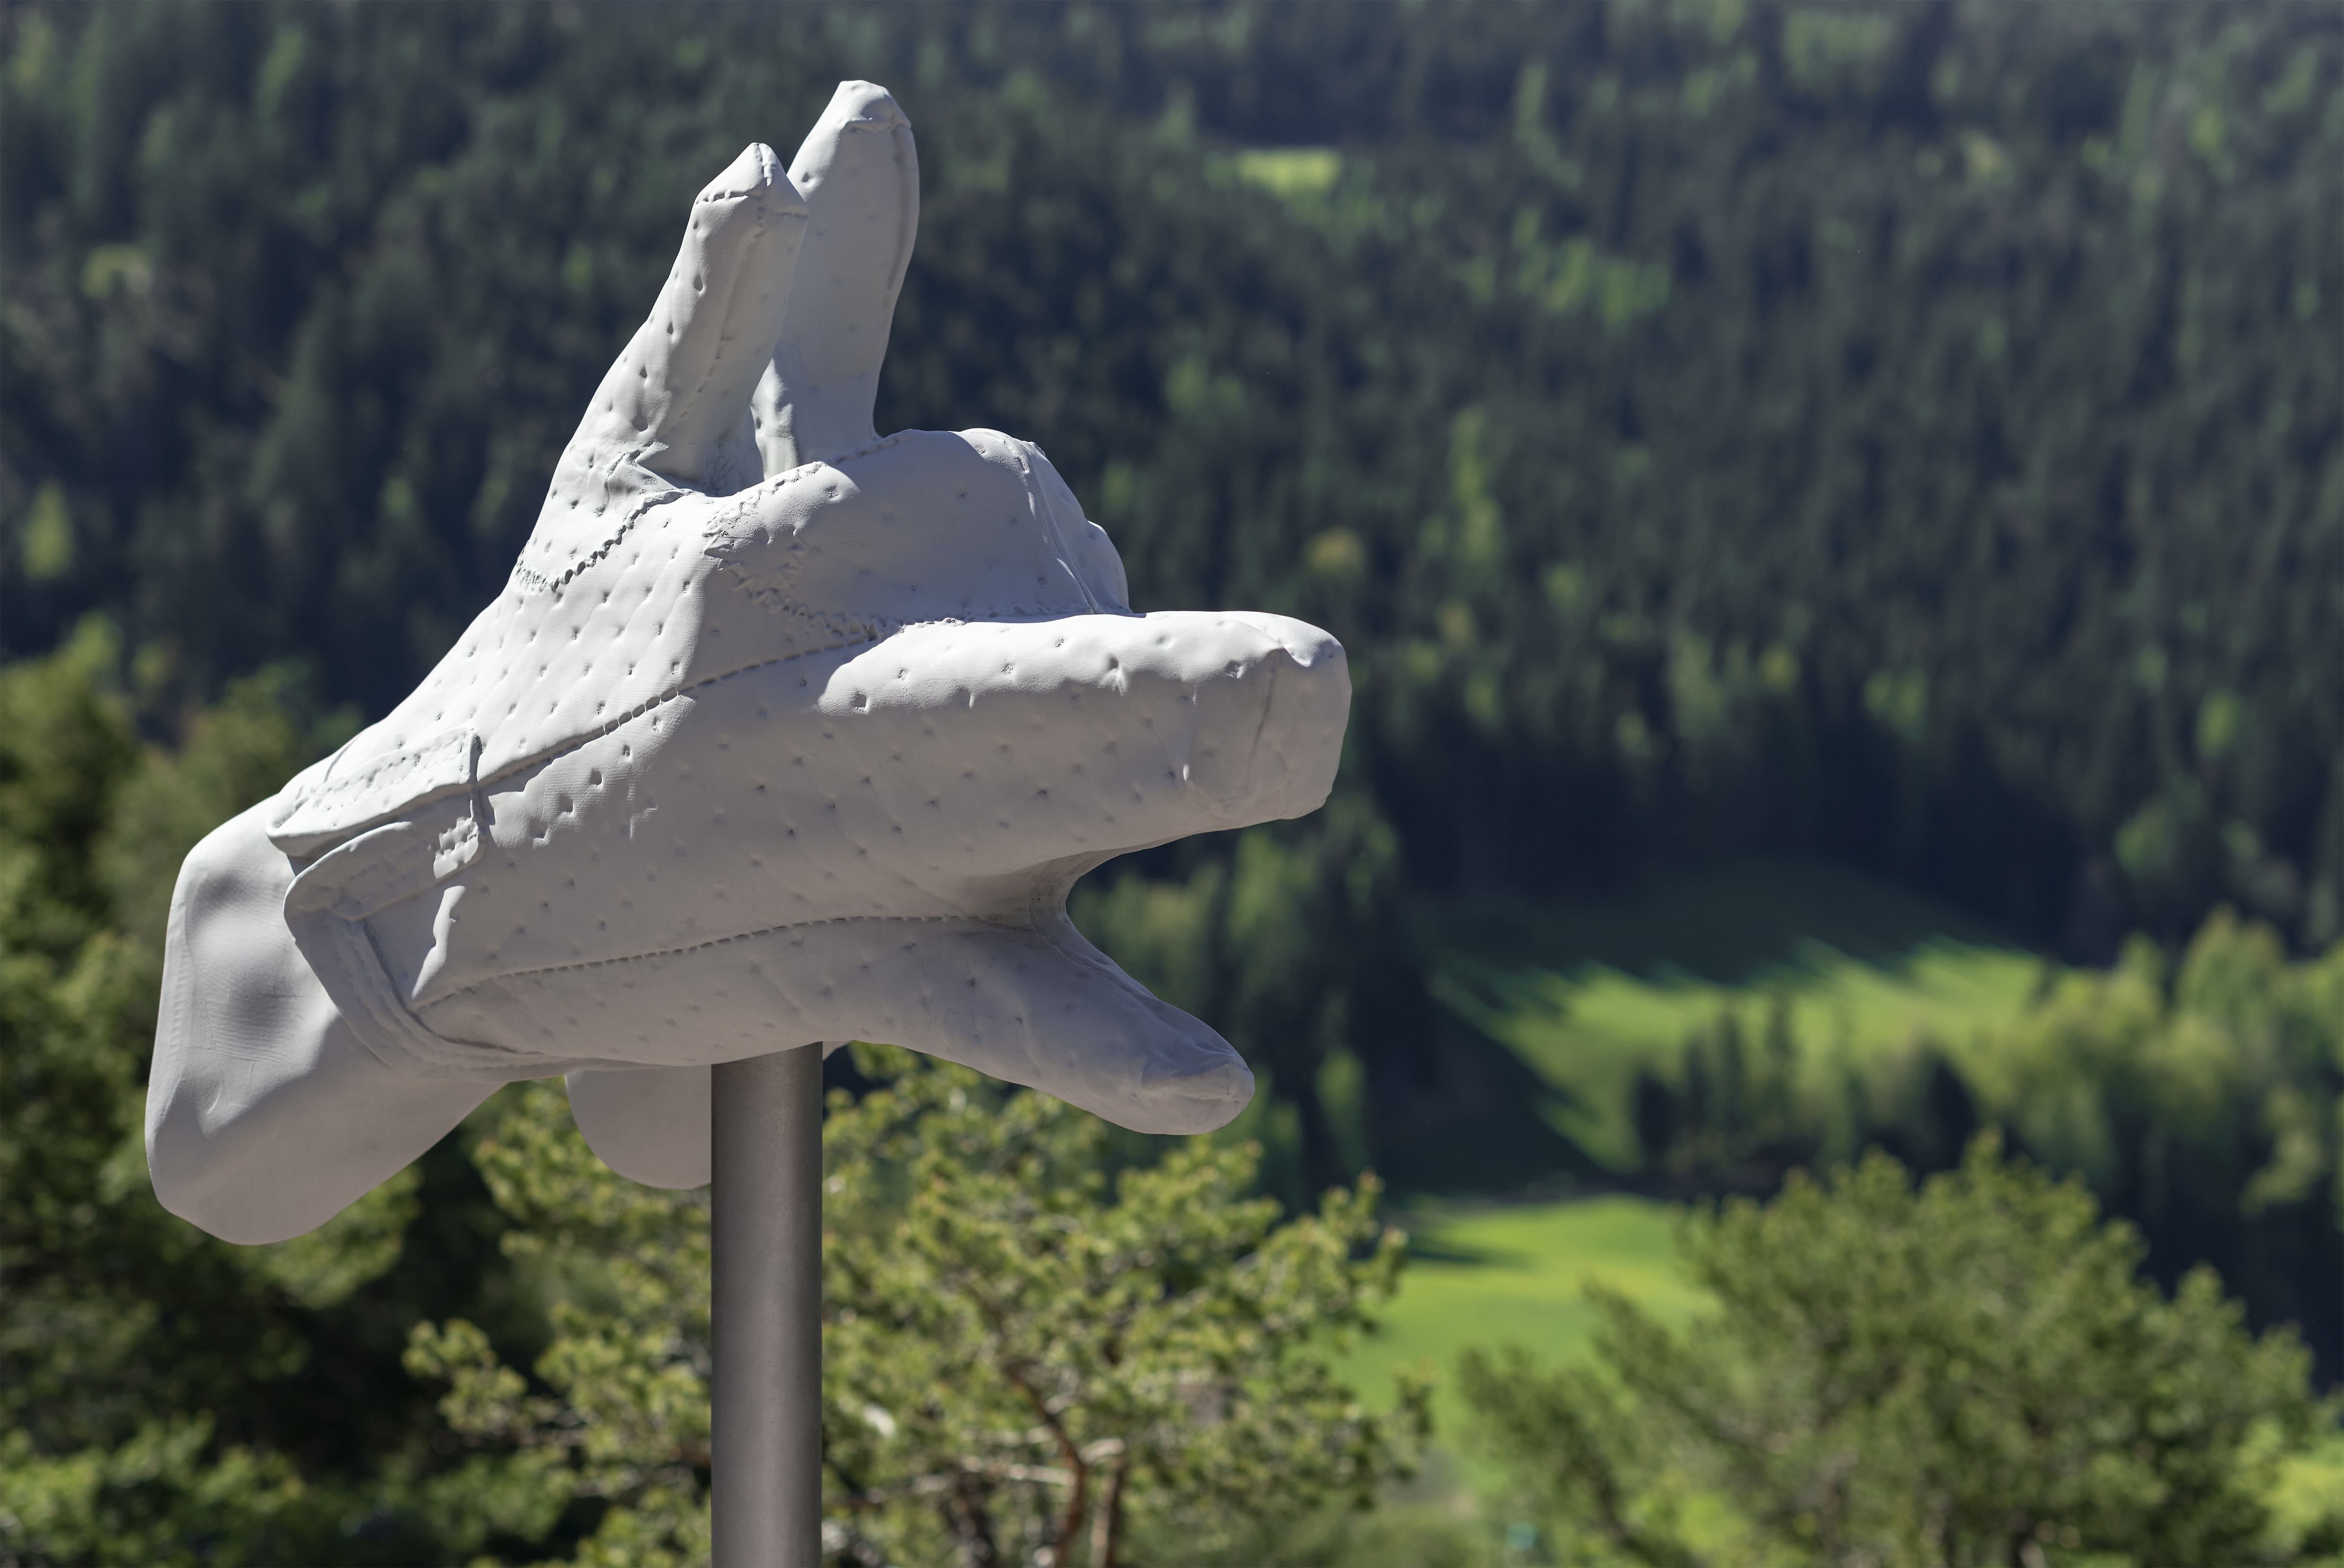 The sculpture resembles the braid of two hands and the head of a wolf at the same time